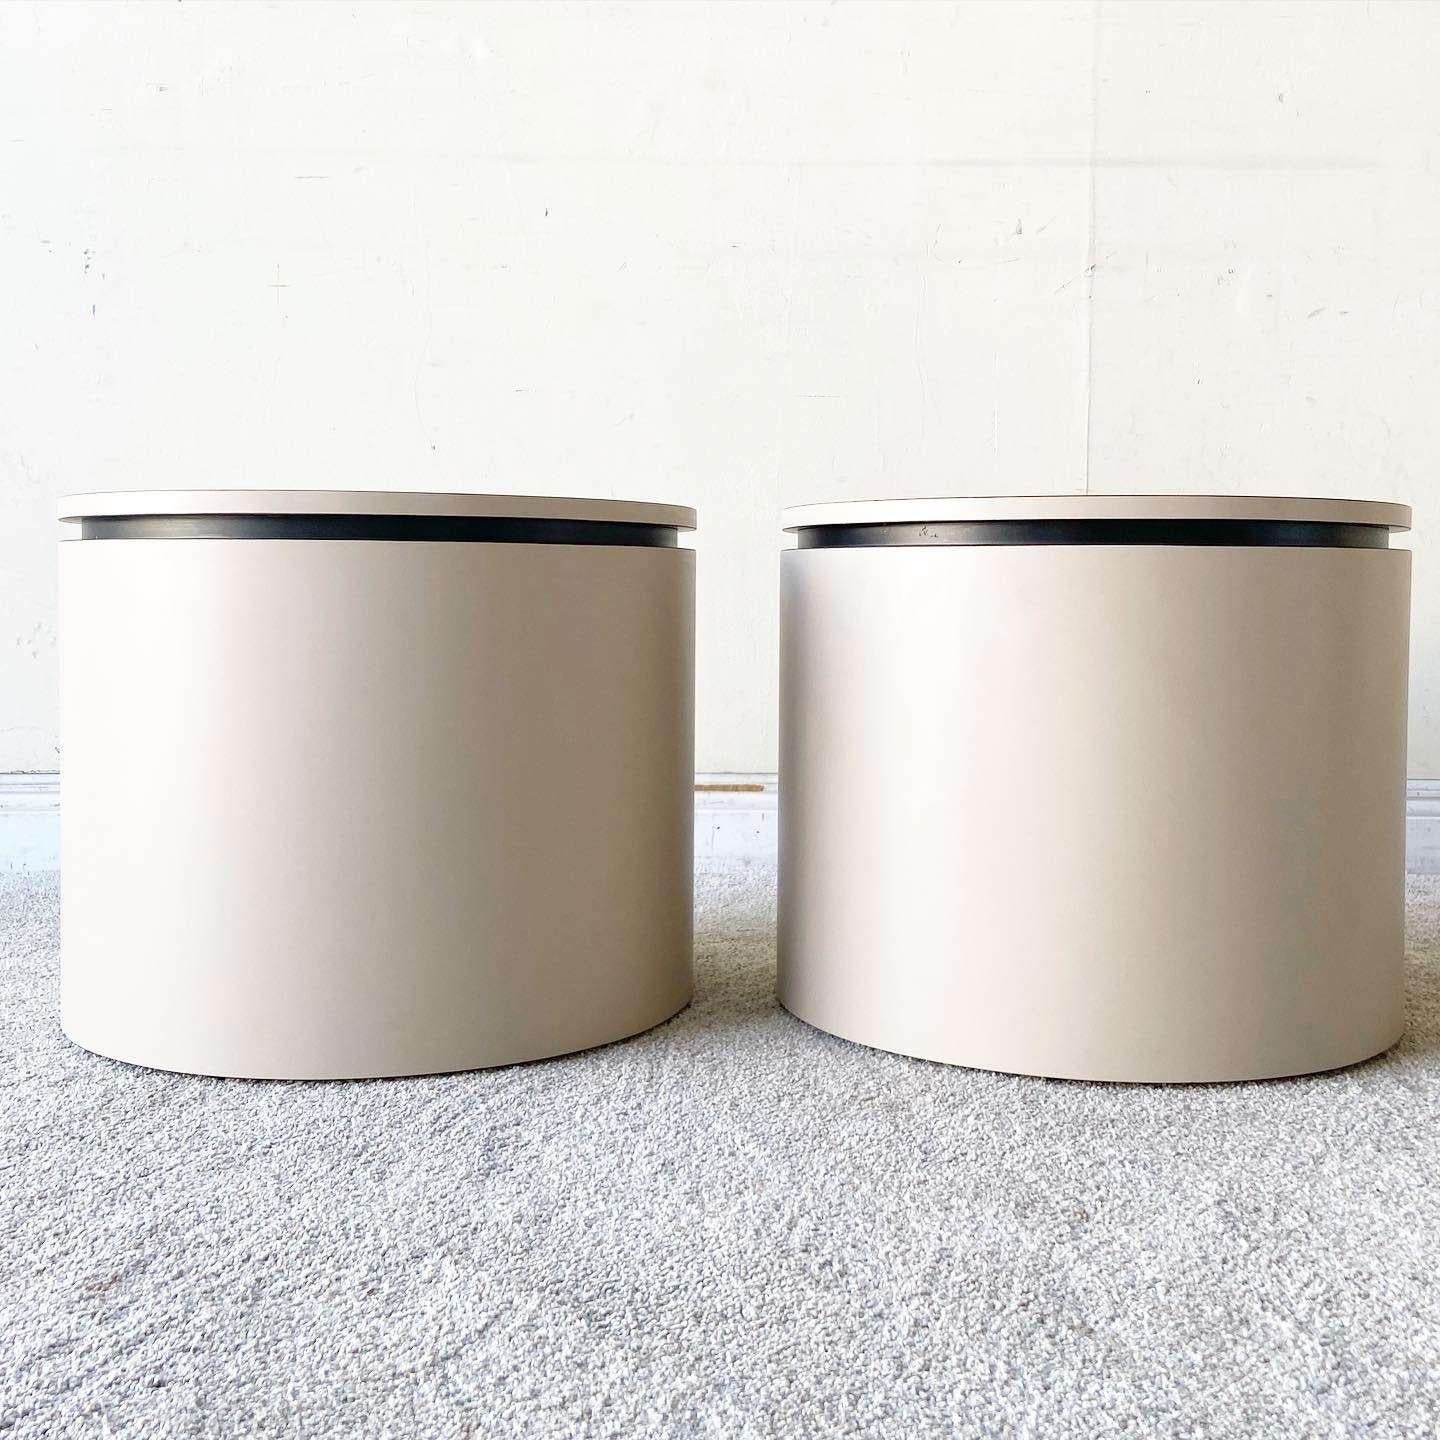 Amazing pair of vintage postmodern side tables on casters. Each feature a tan lacquer laminate with a black strip bordering the top.